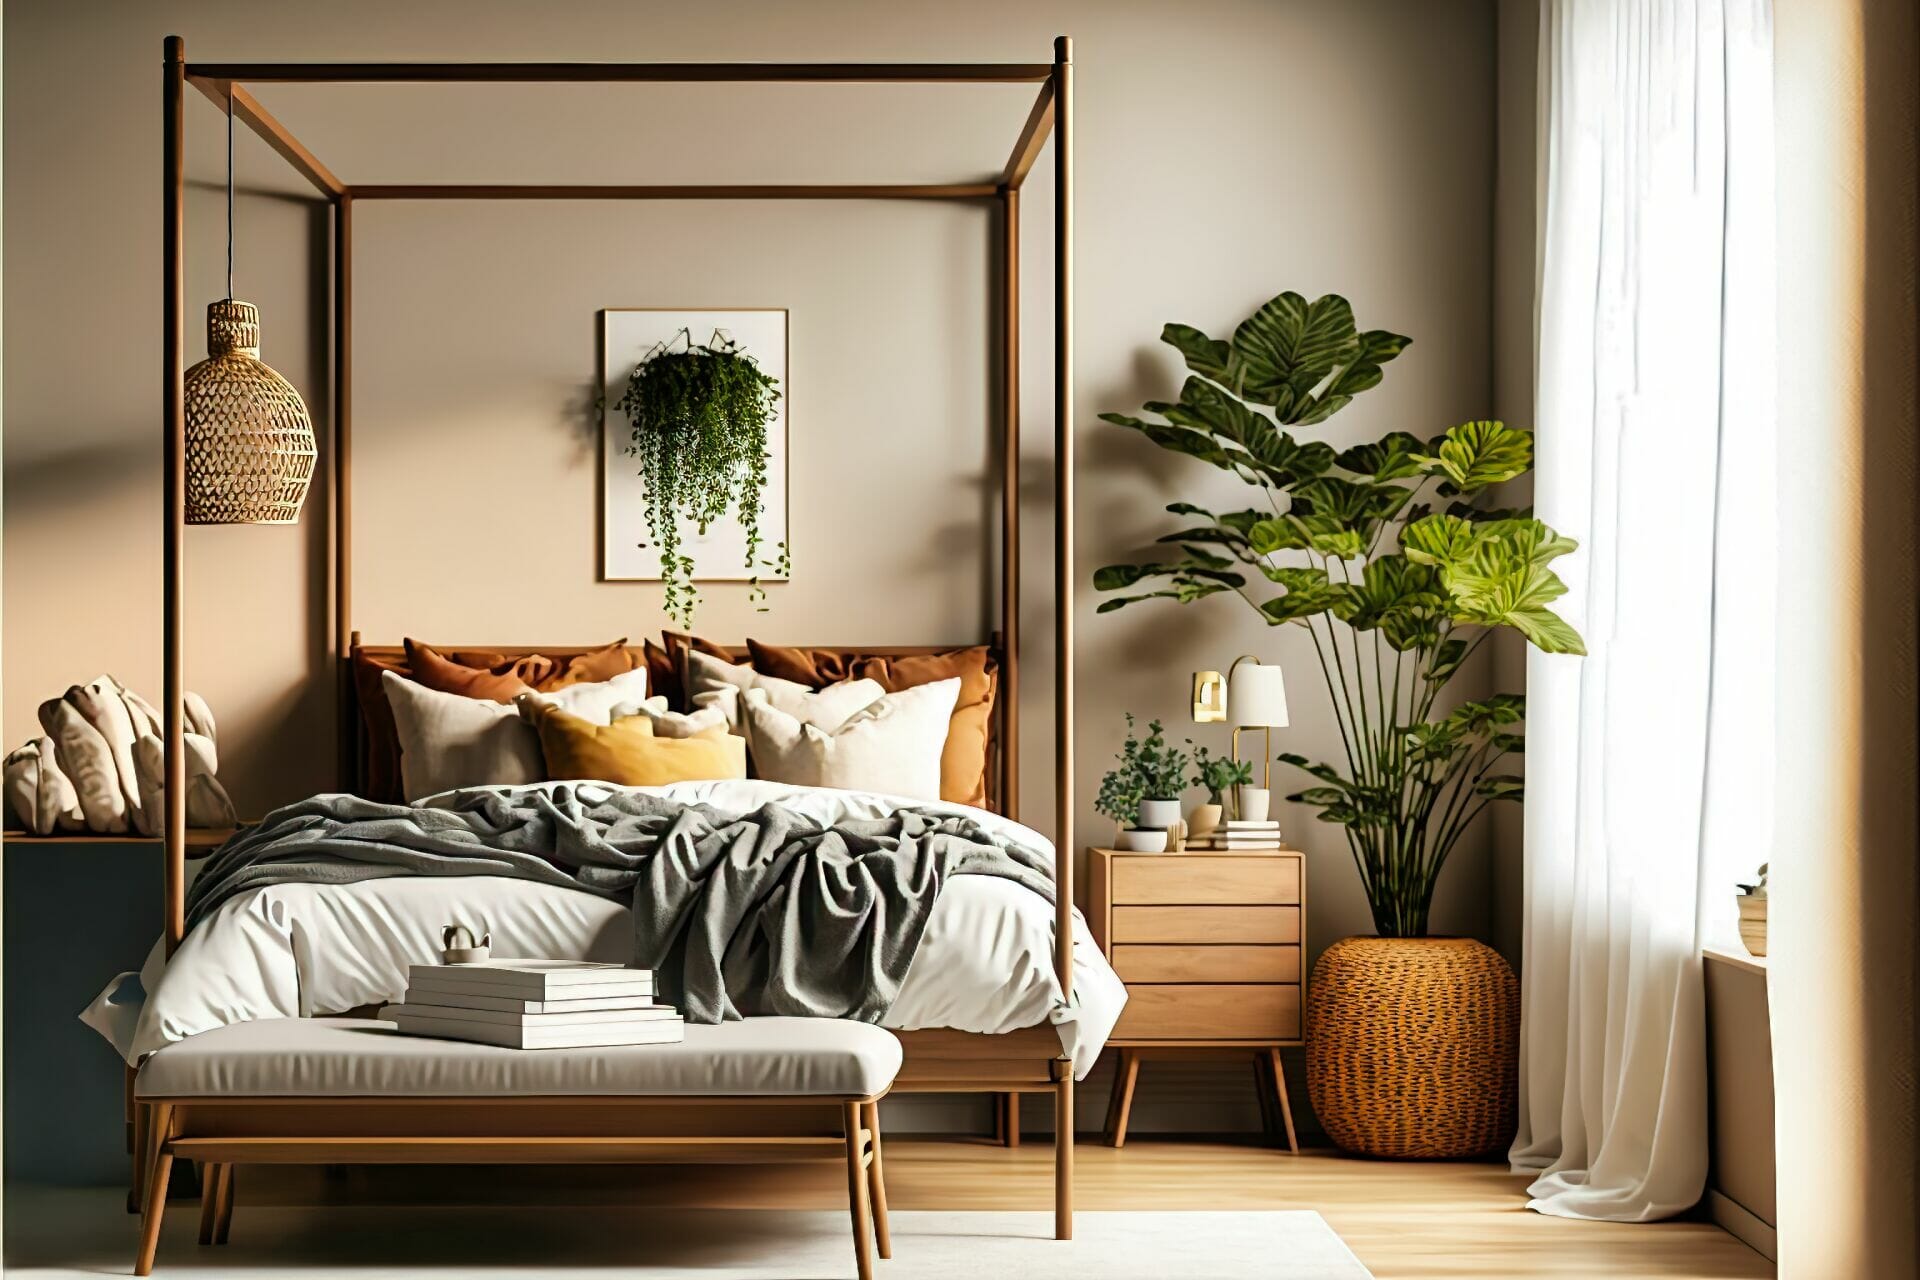 Mid-Century Modern Bedroom – A Cozy And Inviting Modern Bedroom Featuring A Wooden Canopy Bed With A Neutral-Colored Bedspread, A Rattan Armchair, And A Large Potted Plant.